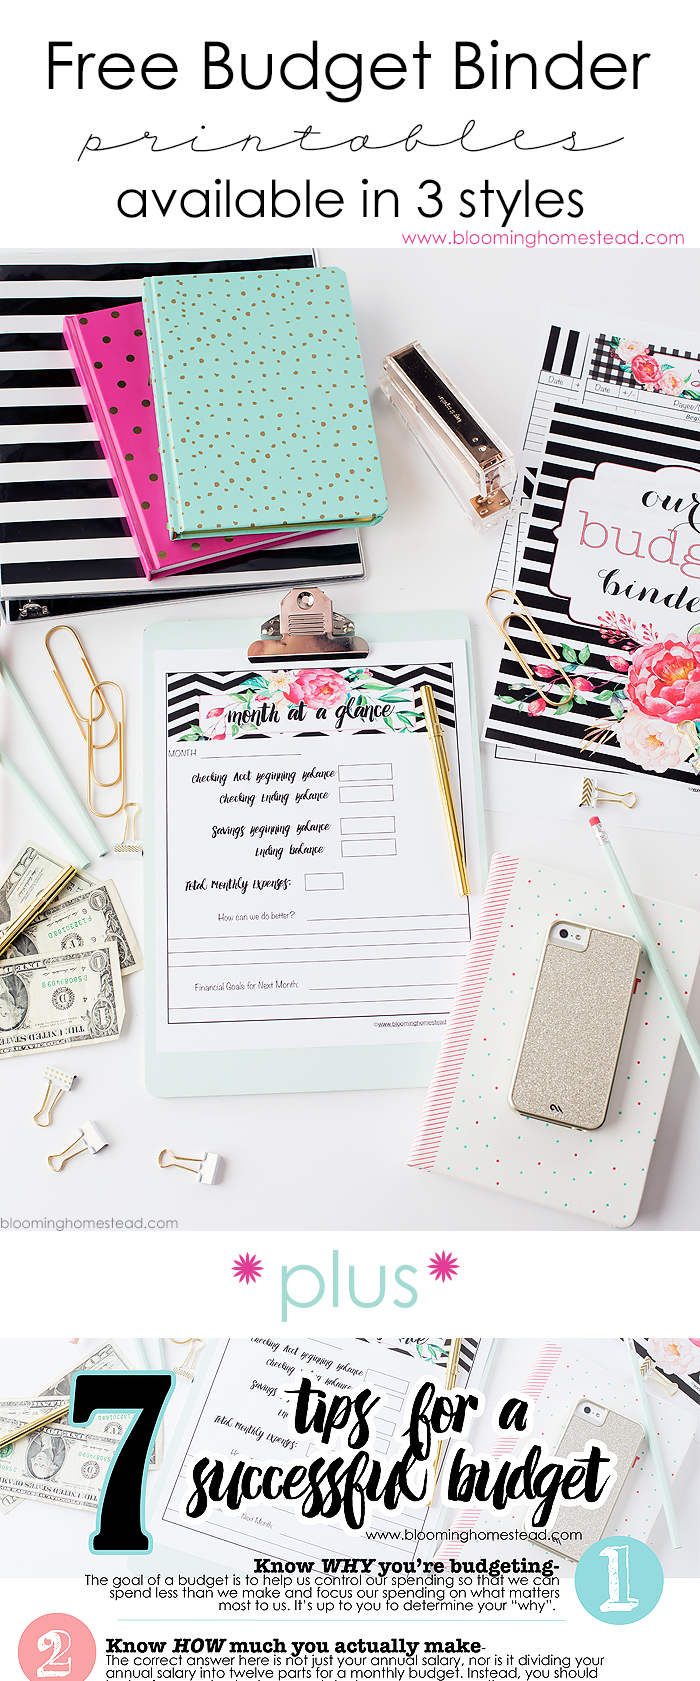 Free budget binder printables in 3 different styles with coordinating home organizational printables. Also inlcudes 7 tips for creating a successful budget!